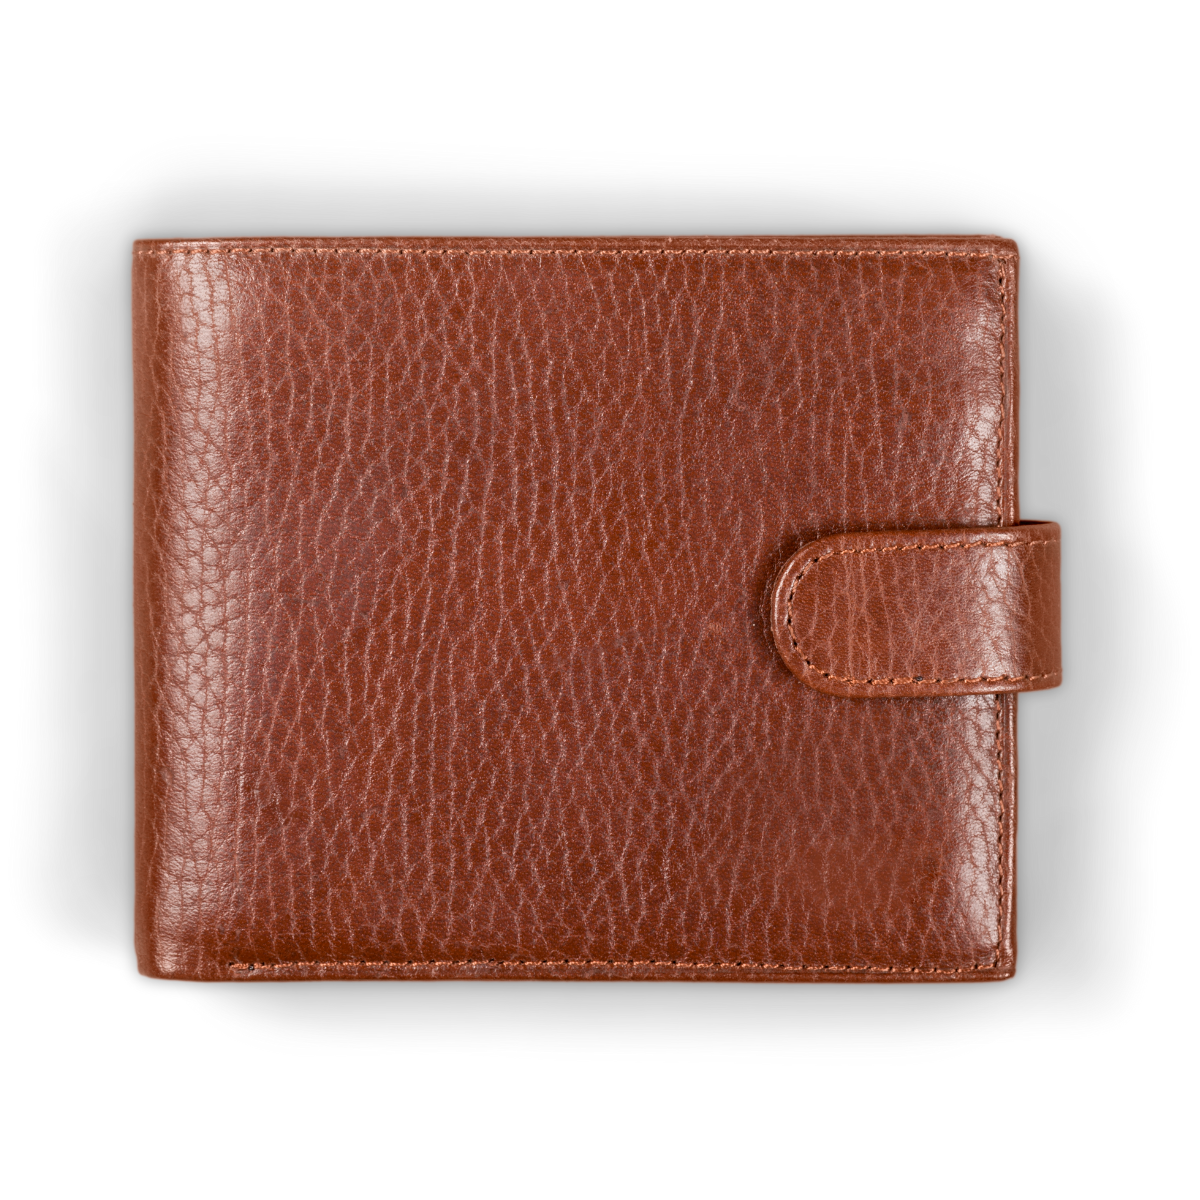 6. Timelessly Stylish: Leather Wallet - The Perfect 3 Year Anniversary Gift for Him